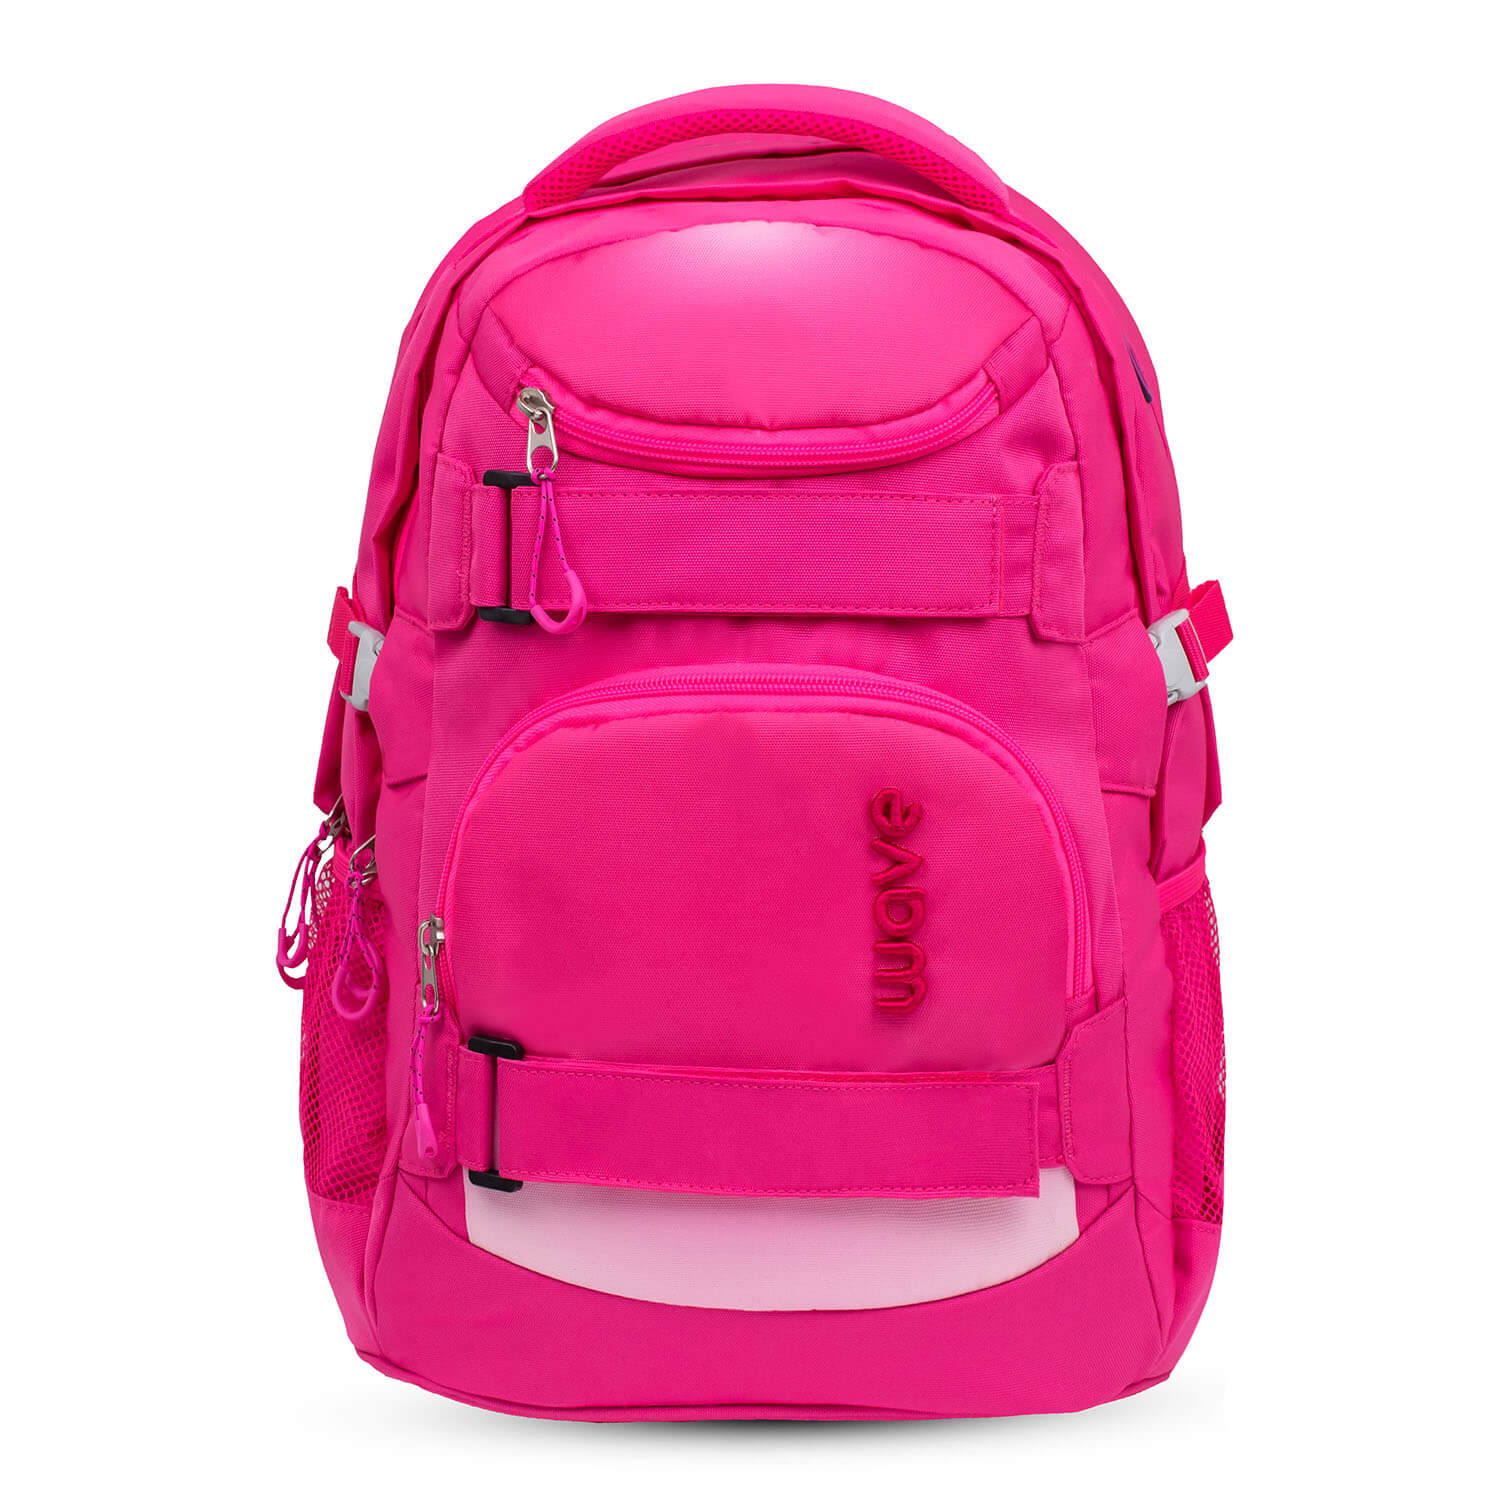 Wave Infinity Ombre Light Pink school backpack with two GRATIS Pencil Pouch